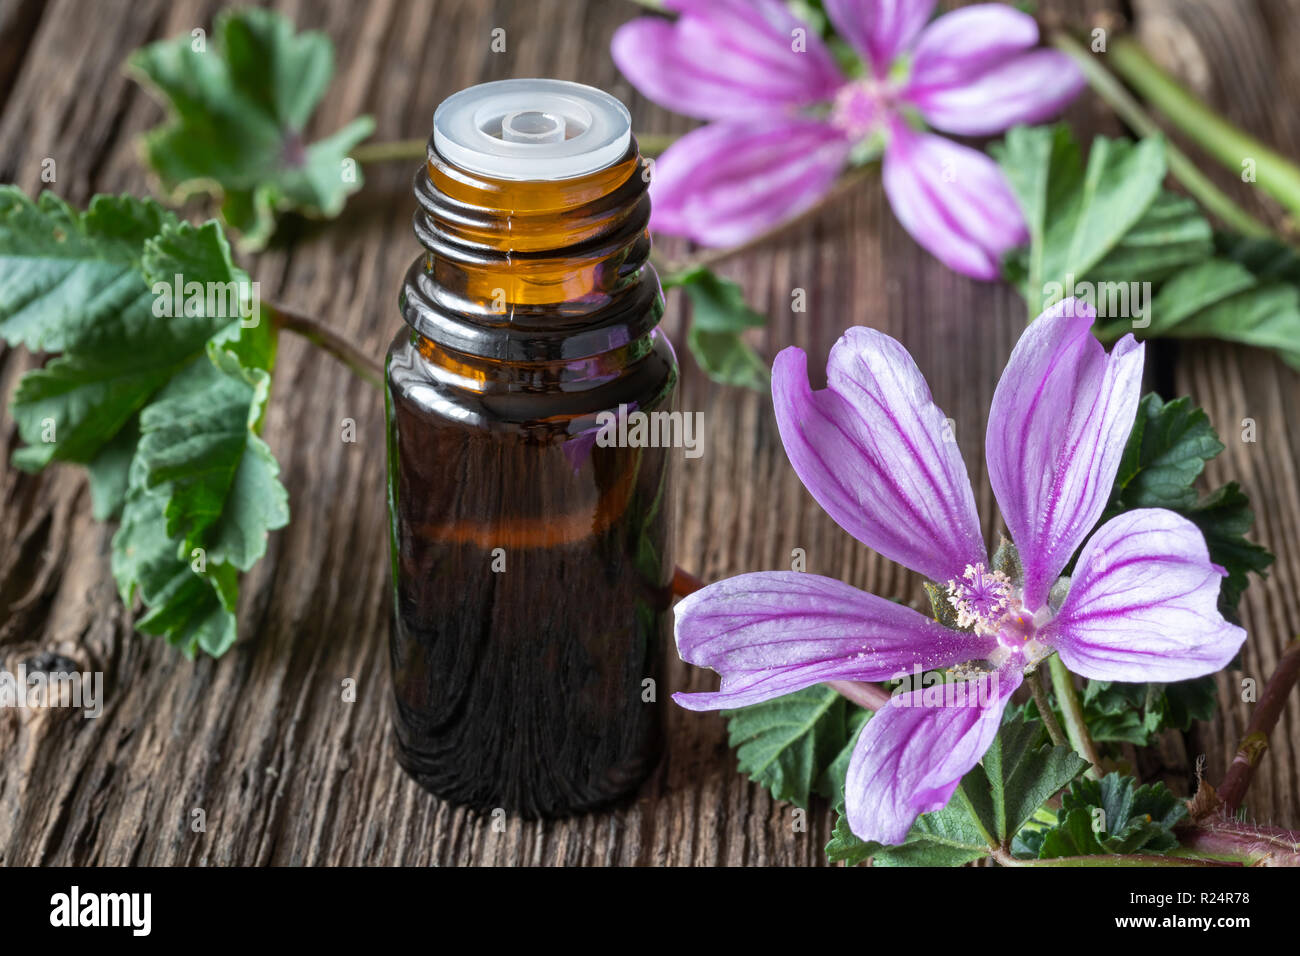 A bottle of common mallow essential oil with fresh blooming malva sylvestris twigs Stock Photo